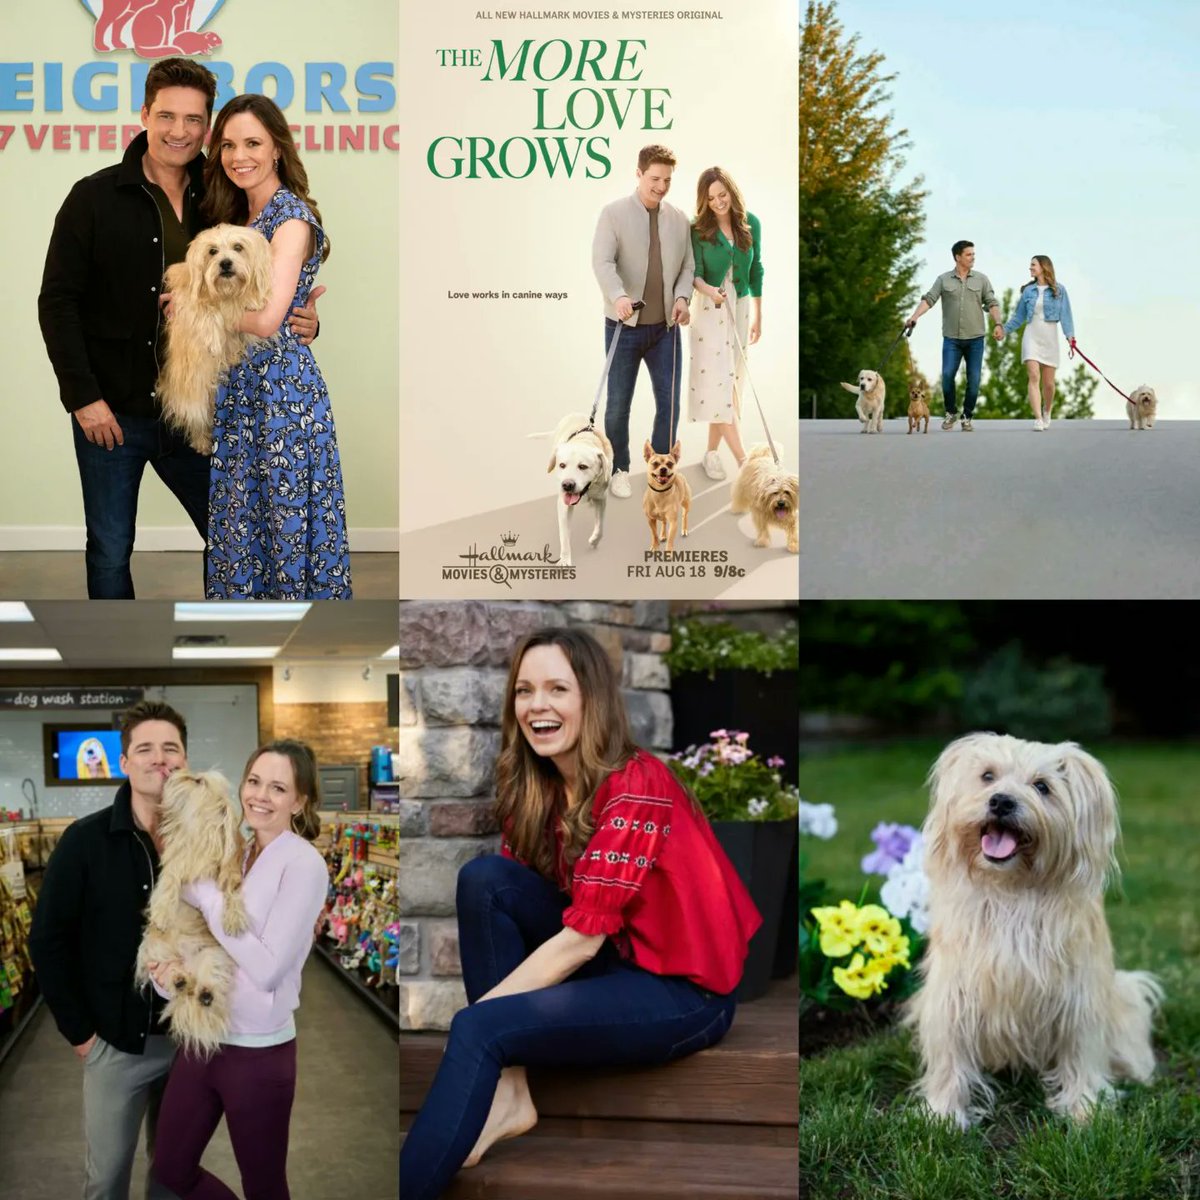 The More Love Grows starring Rachel Boston and Warren Christie premieres on Hallmark Movies And Mysteries in 36 minutes! 🐕🐶 #themorelovegrows